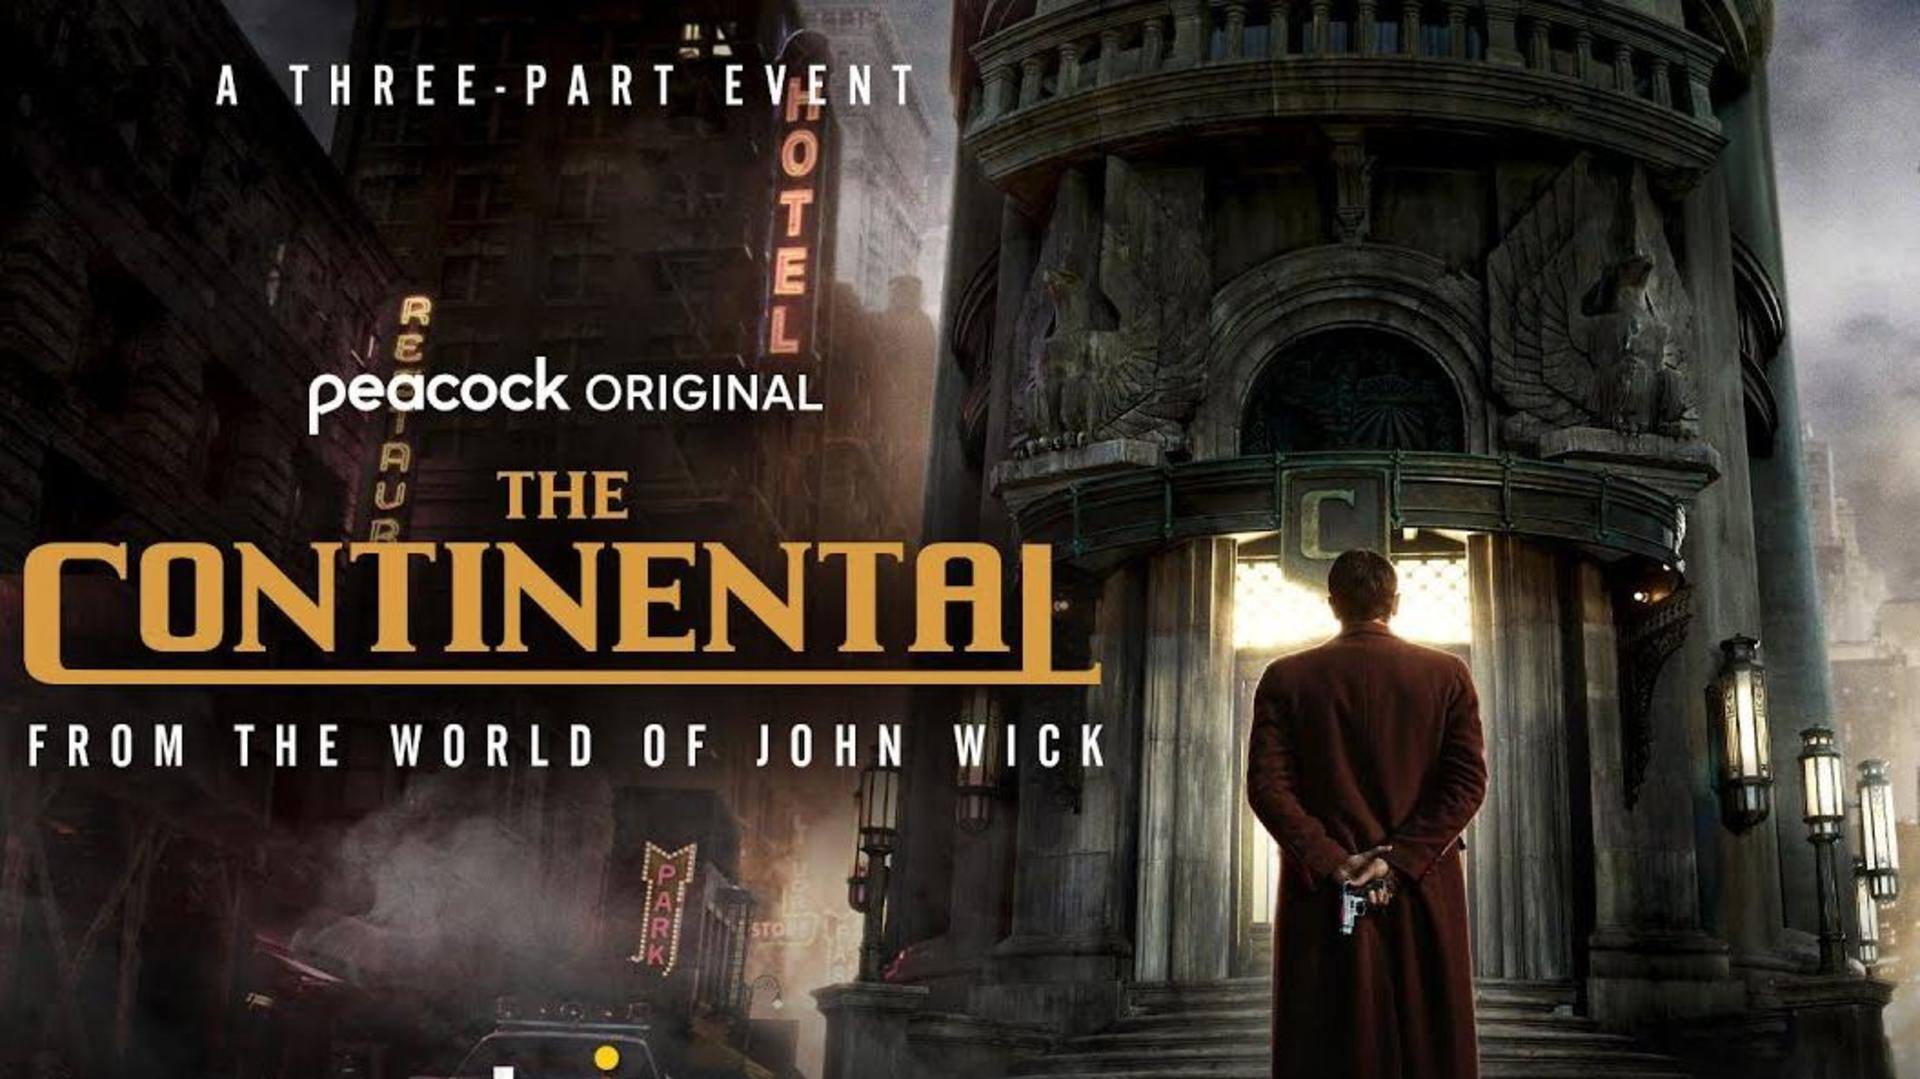 'John Wick' prequel series 'The Continental' release date revealed